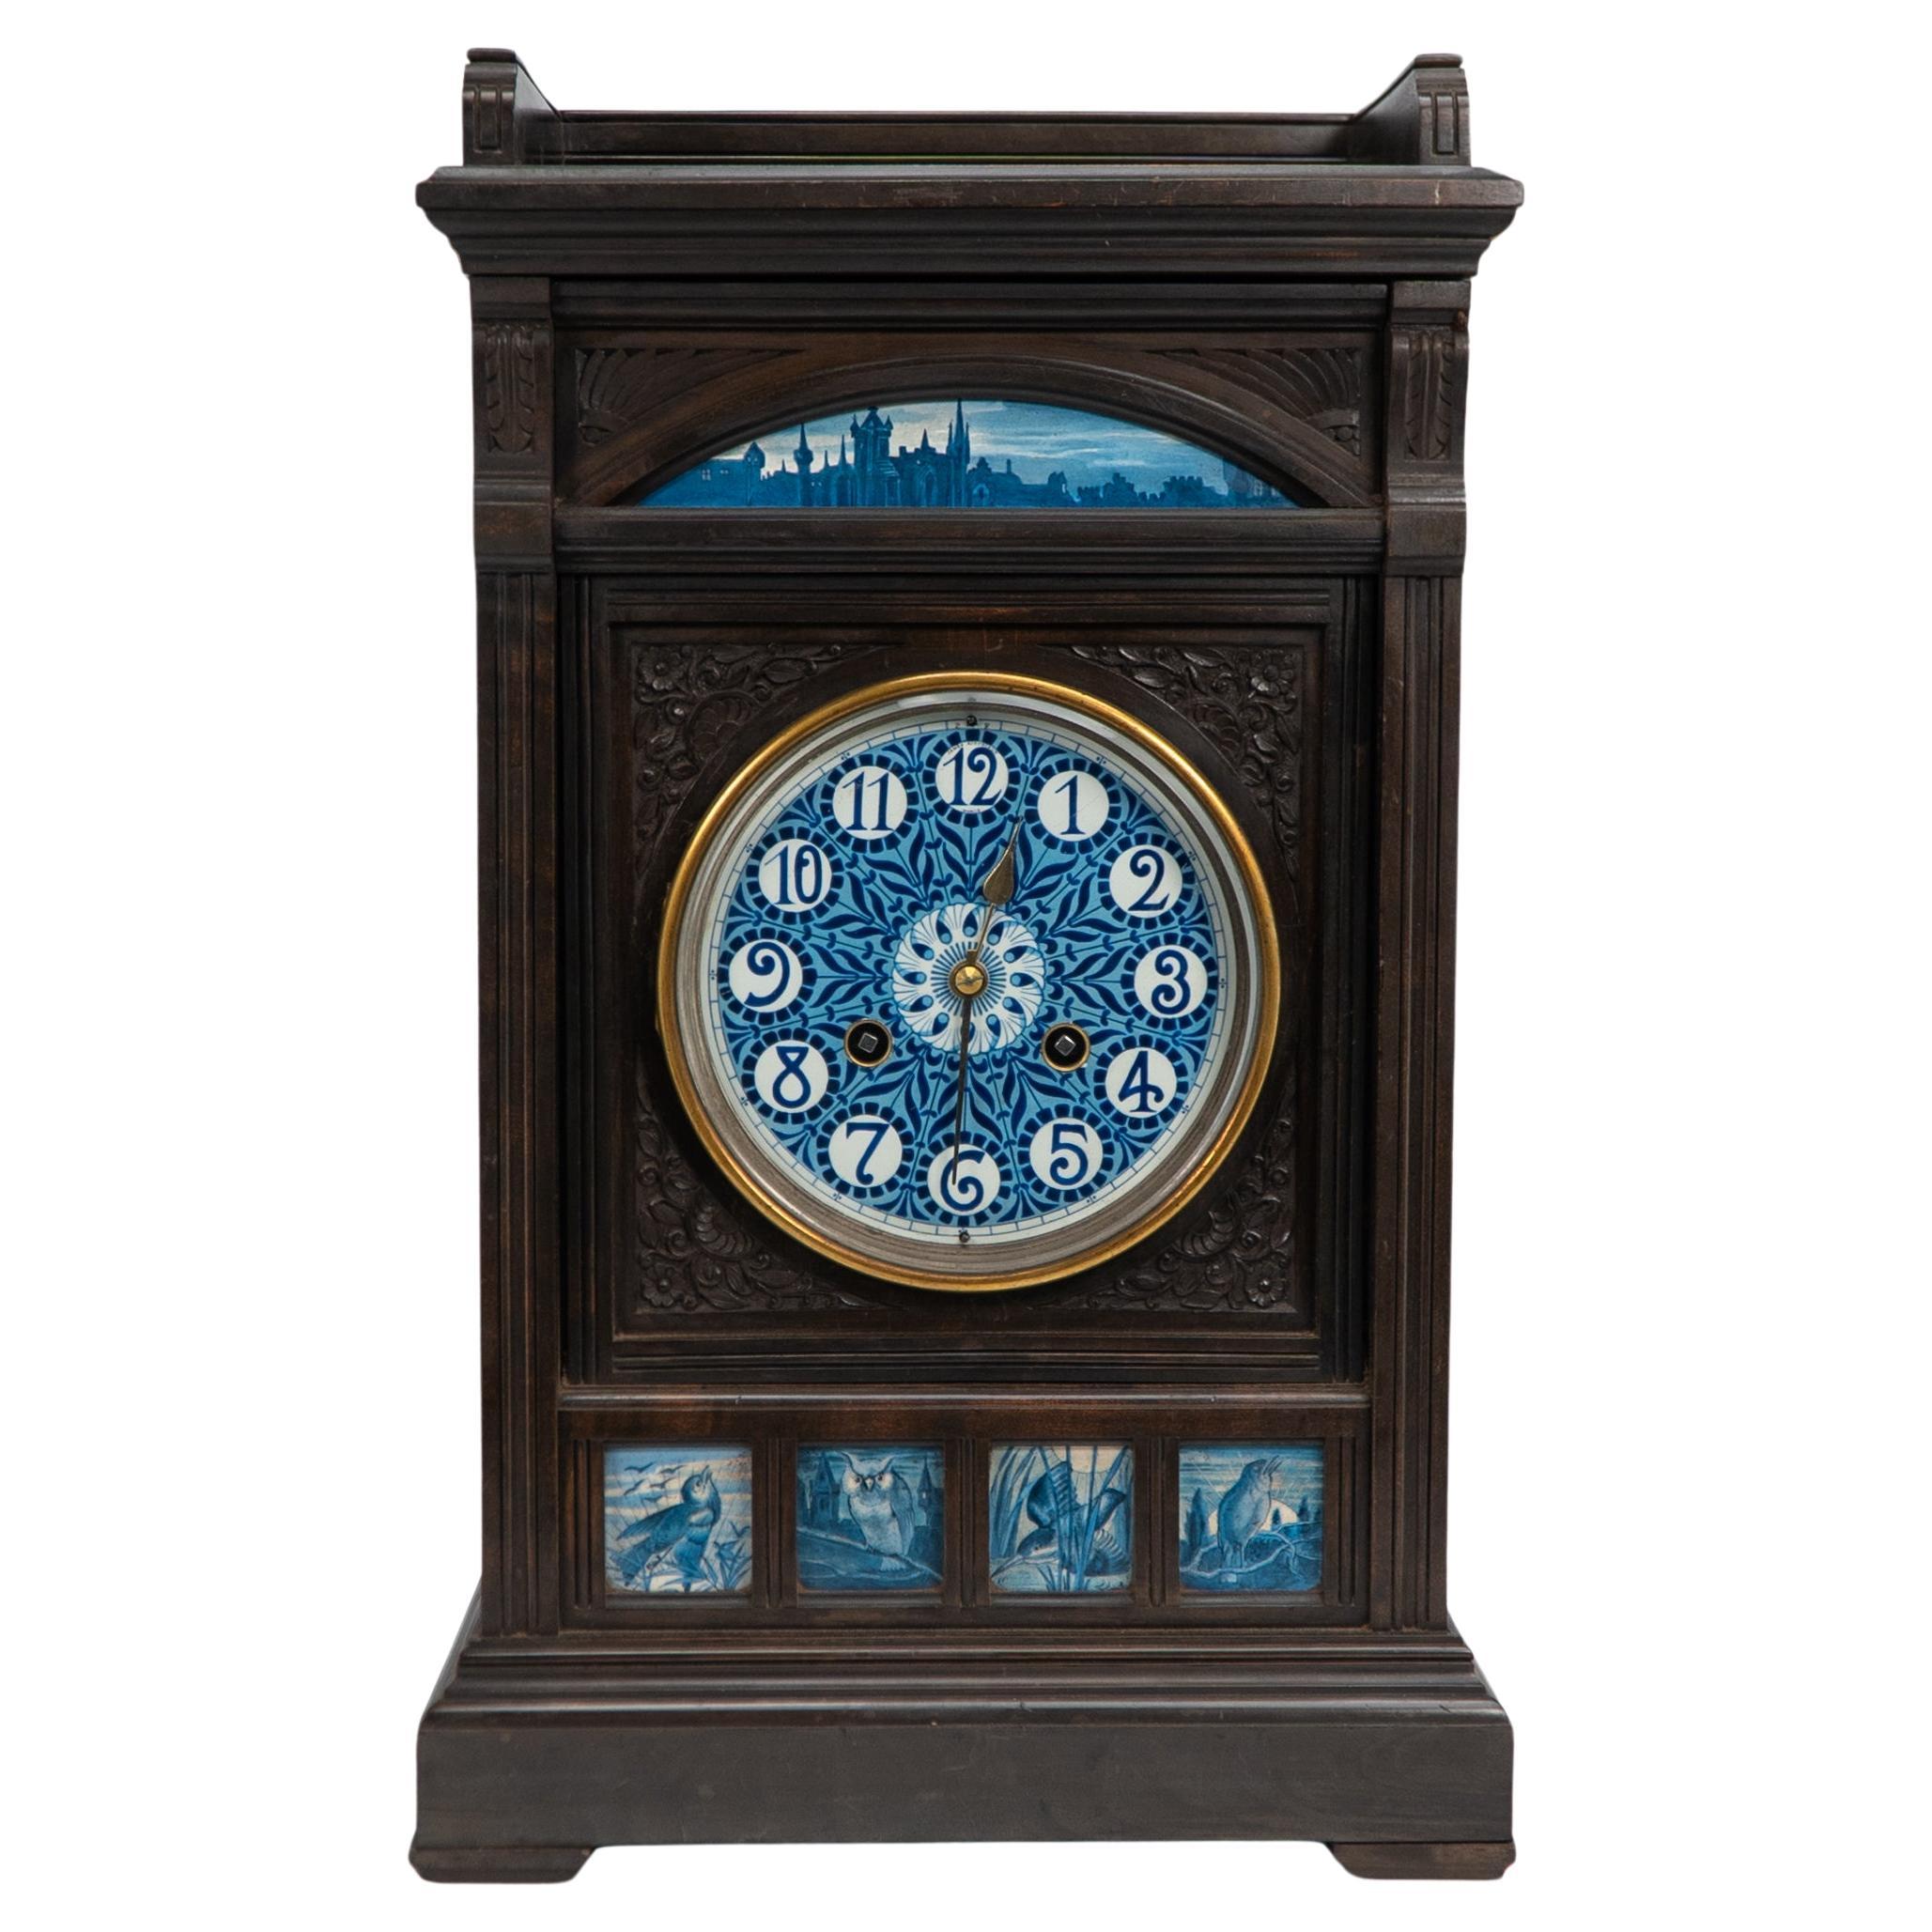 James Aitchison Aesthetic Movement mantel or bracket clock with Owls & Songbirds